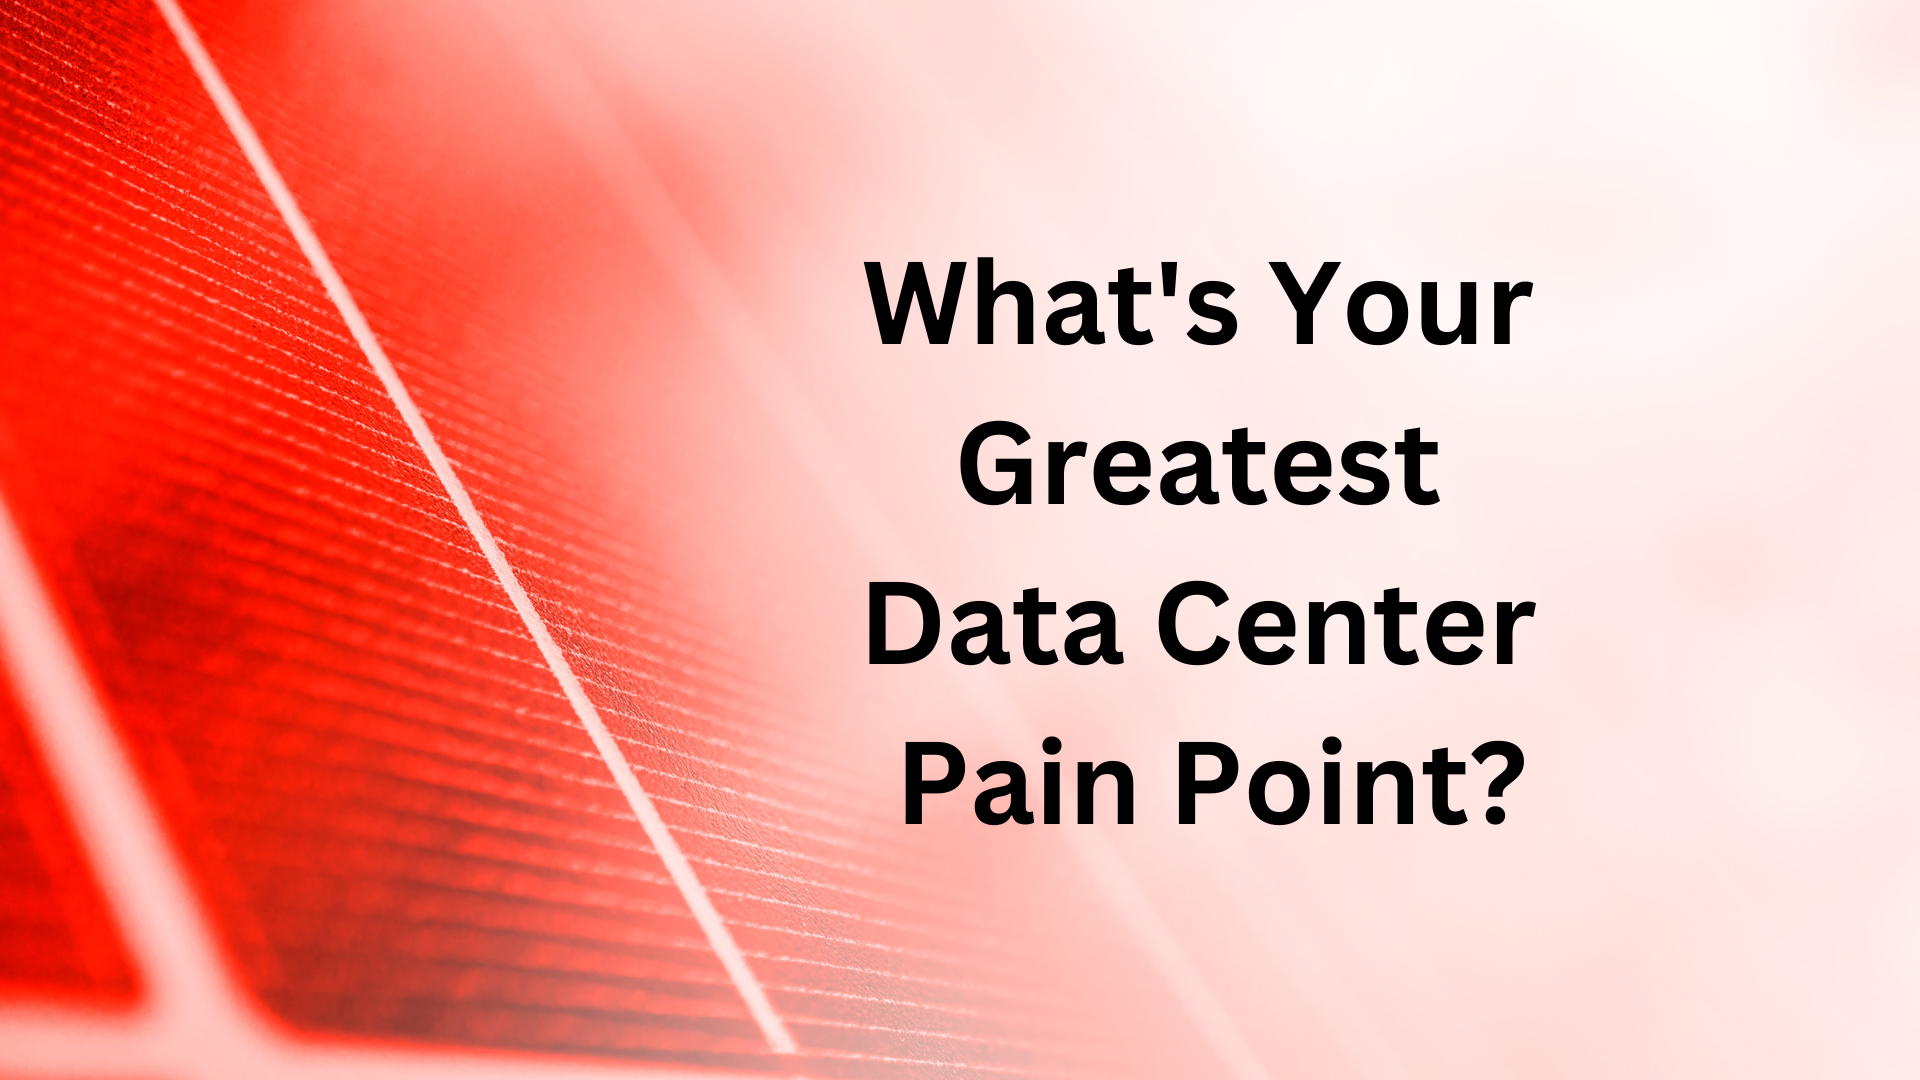 What’s your greatest data center pain point? Respondents replied that expensive power is their number one data center challenge